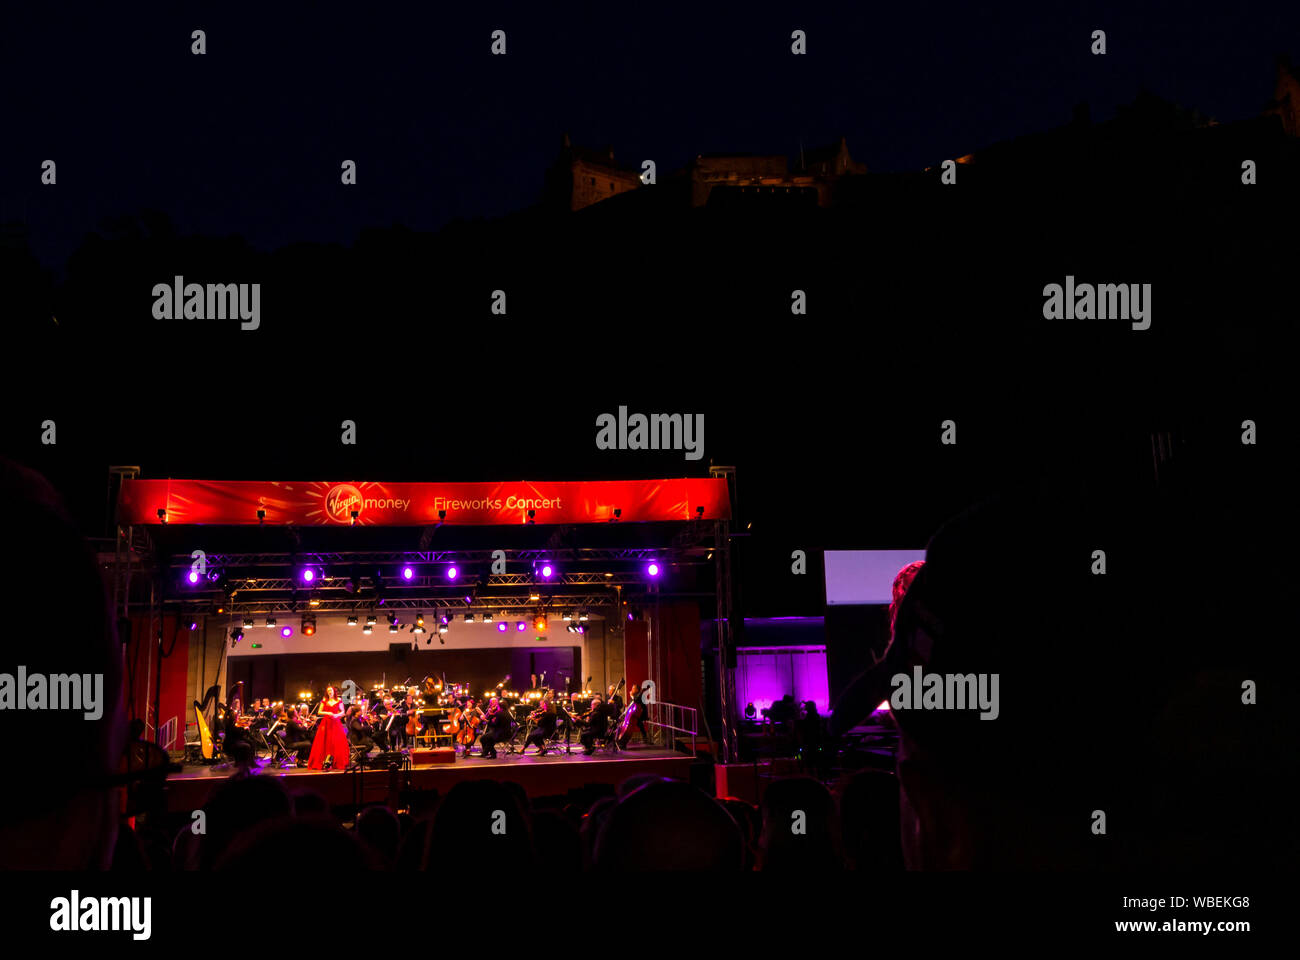 Edinburgh, Scotland, UK, 26 August 2019. Edinburgh International Book Festival. The 2019 EIF draws to a close with its traditional finale, the Virgin Money sponsored fireworks concert by Scottish Chamber Orchestra in Ross Theatre in Princes Street Gardens, featuring mezzo-soprano Catriona Morison, conducted by Marta Gardolinska Stock Photo